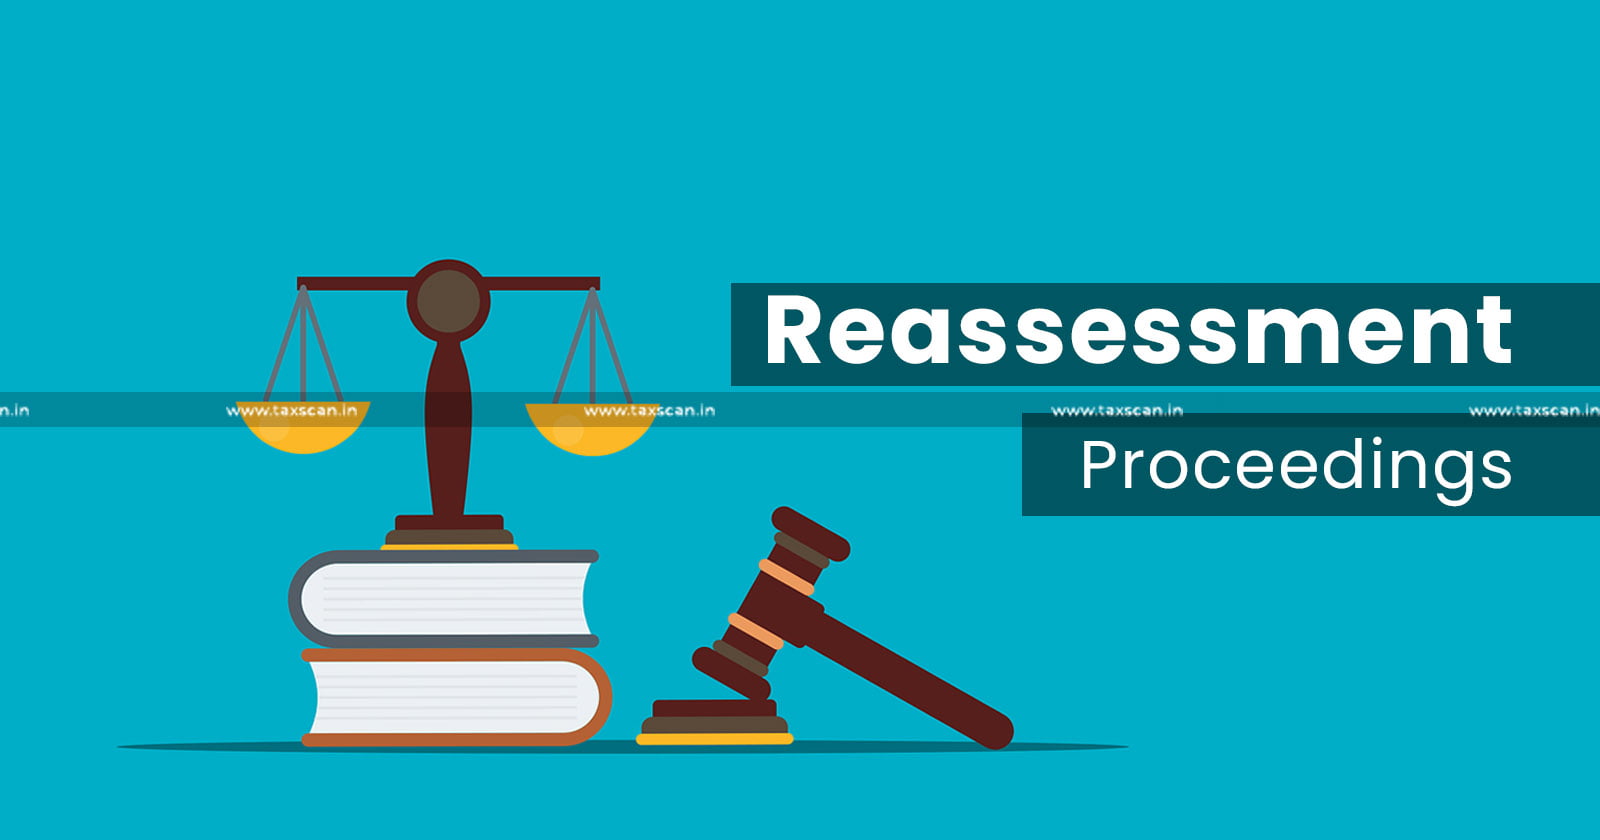 Re-Assessment - Re-Assessment Proceedings - Income Tax Act - Reasonable Person - ITAT - taxscan